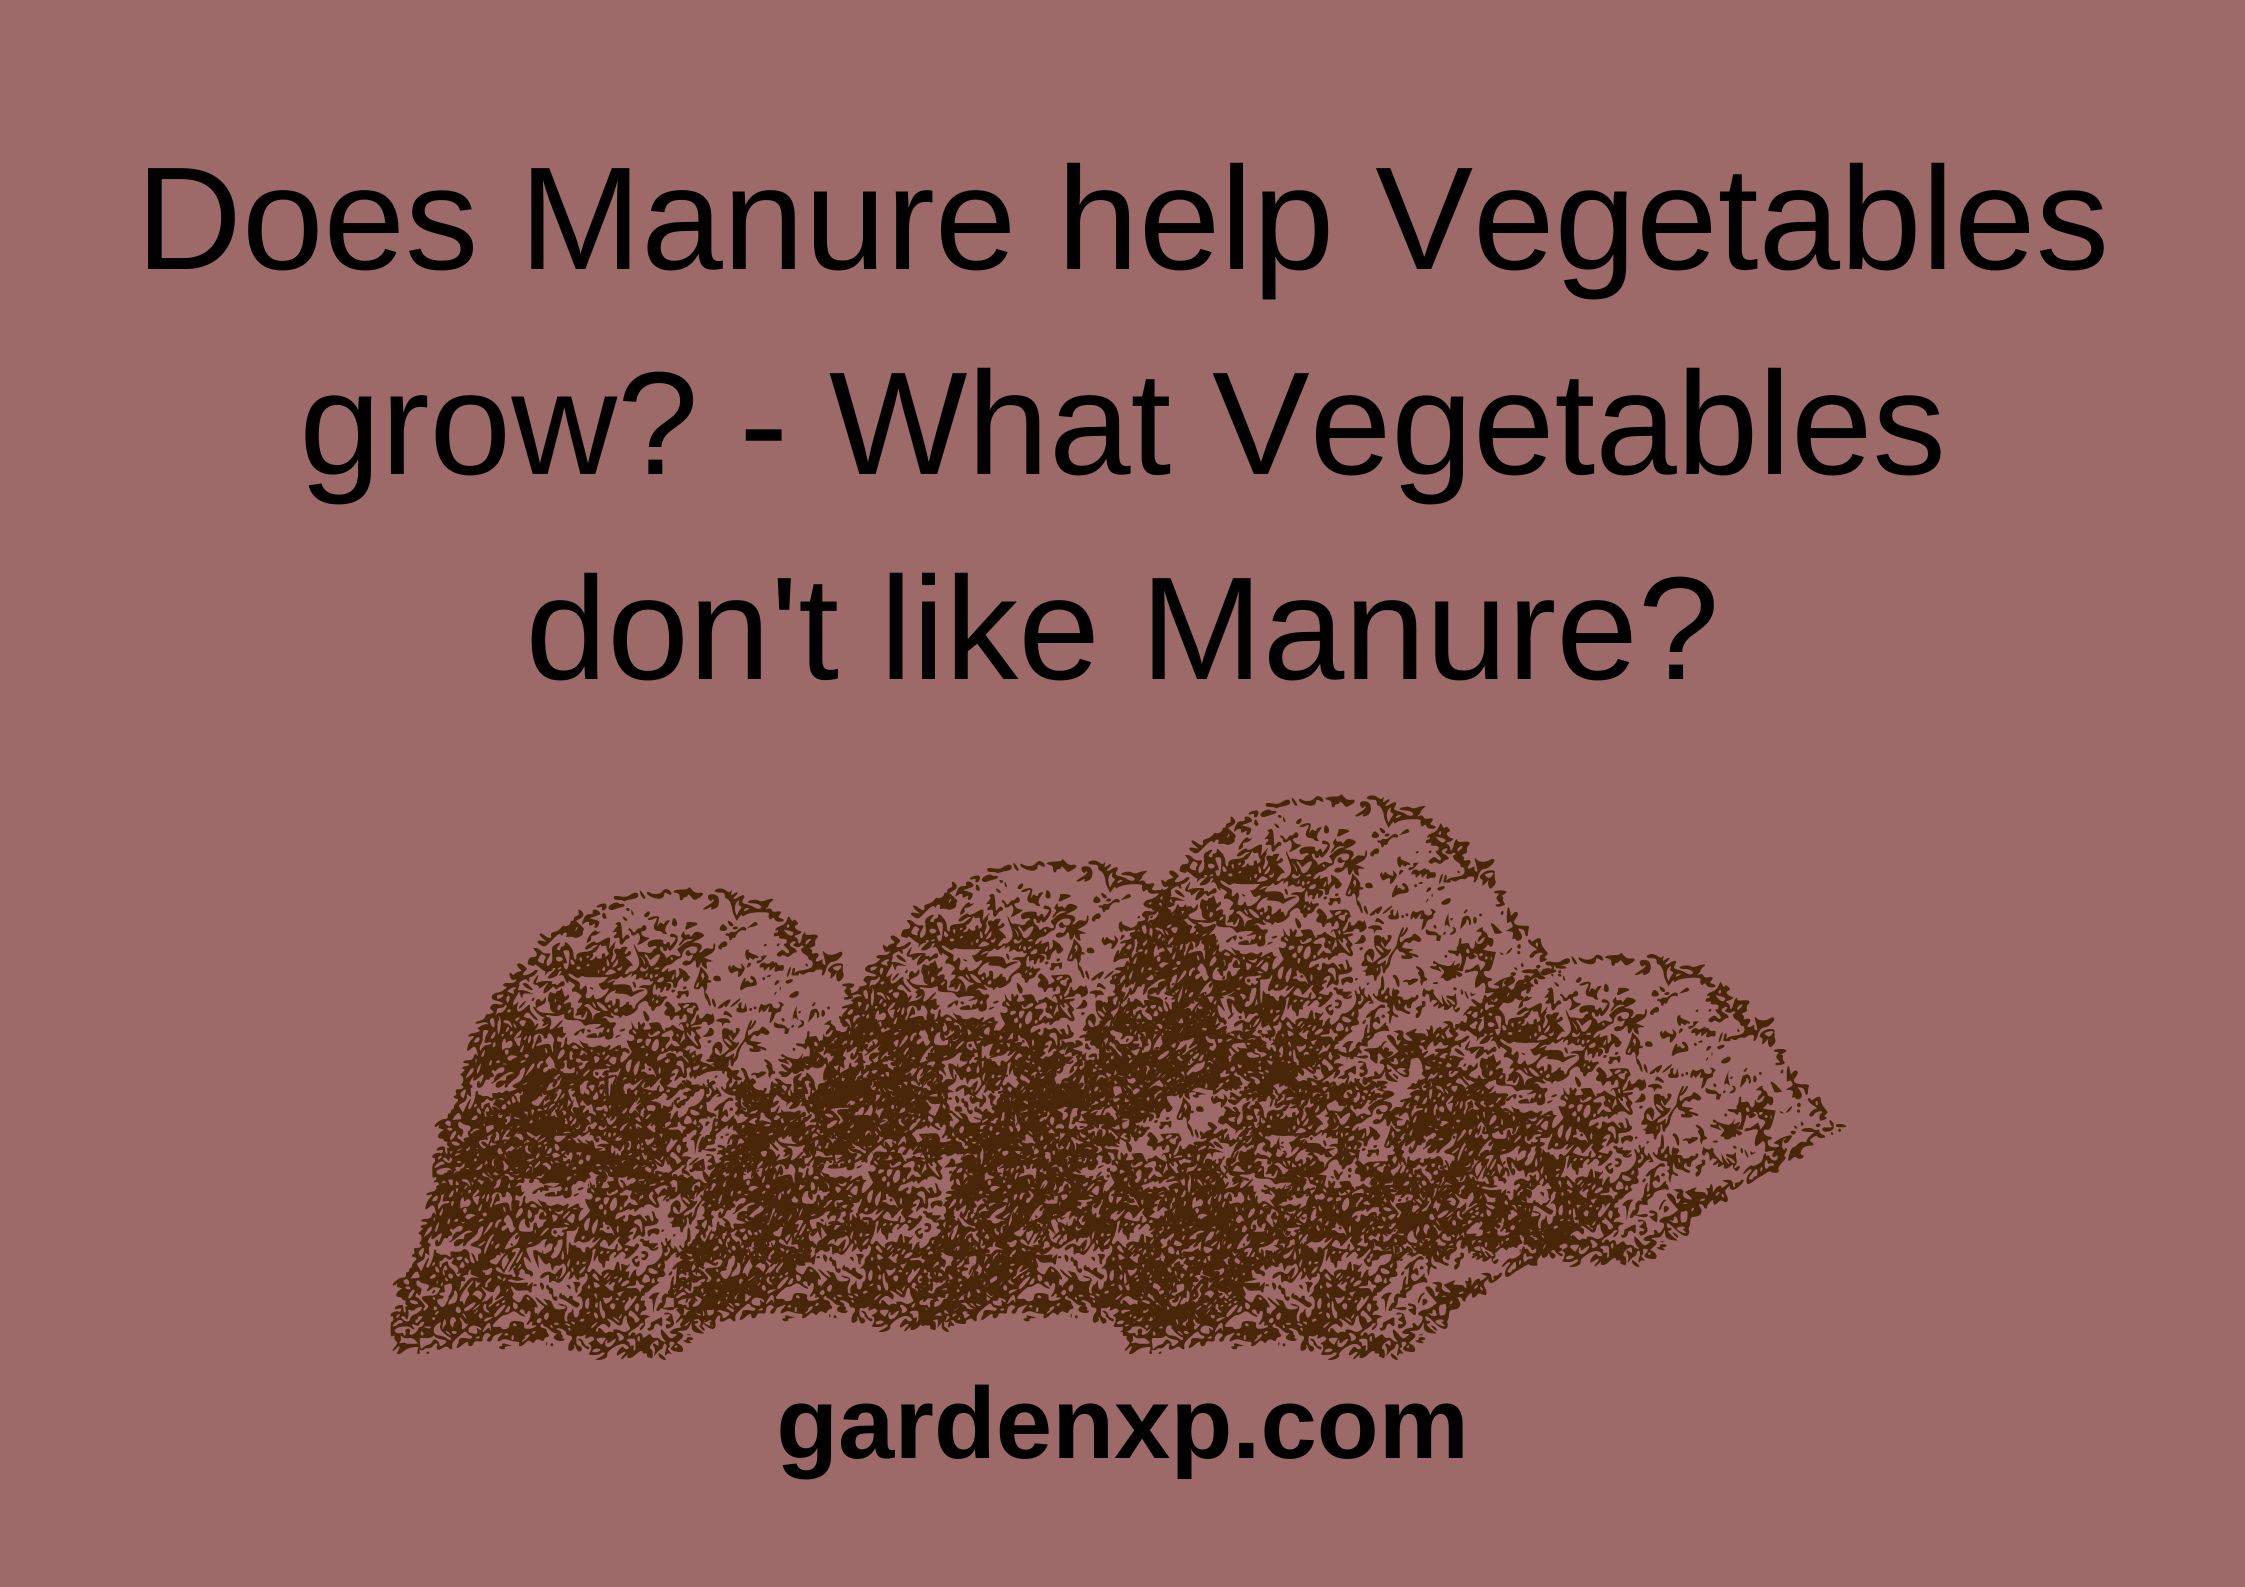 Does Manure help Vegetables grow? - What Vegetables don't like Manure?